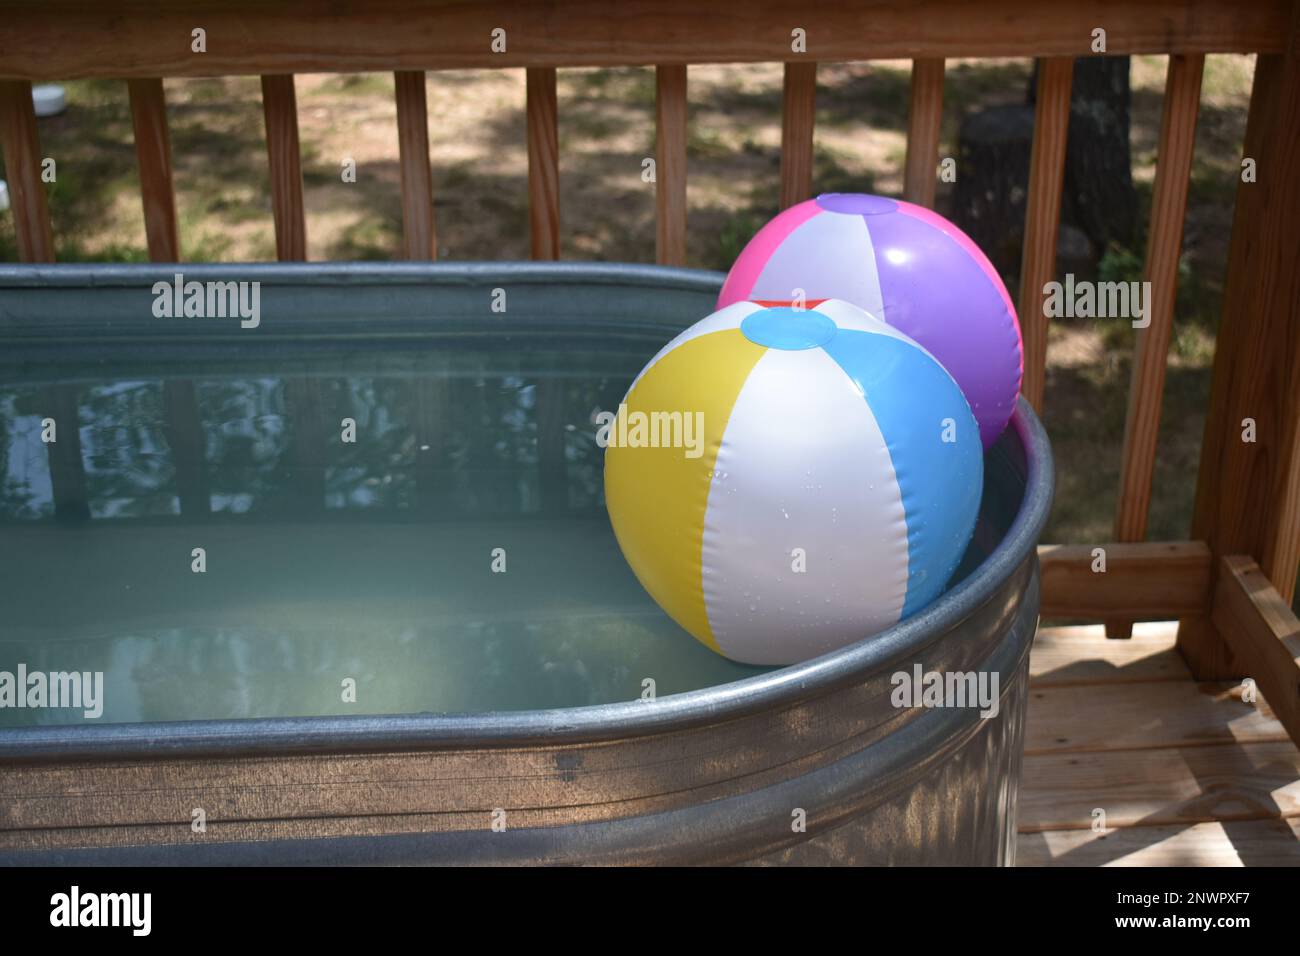 Two inflated beach balls floating in a stock tank pool.  A refreshing place to cool off on a hot summer day. Stock Photo